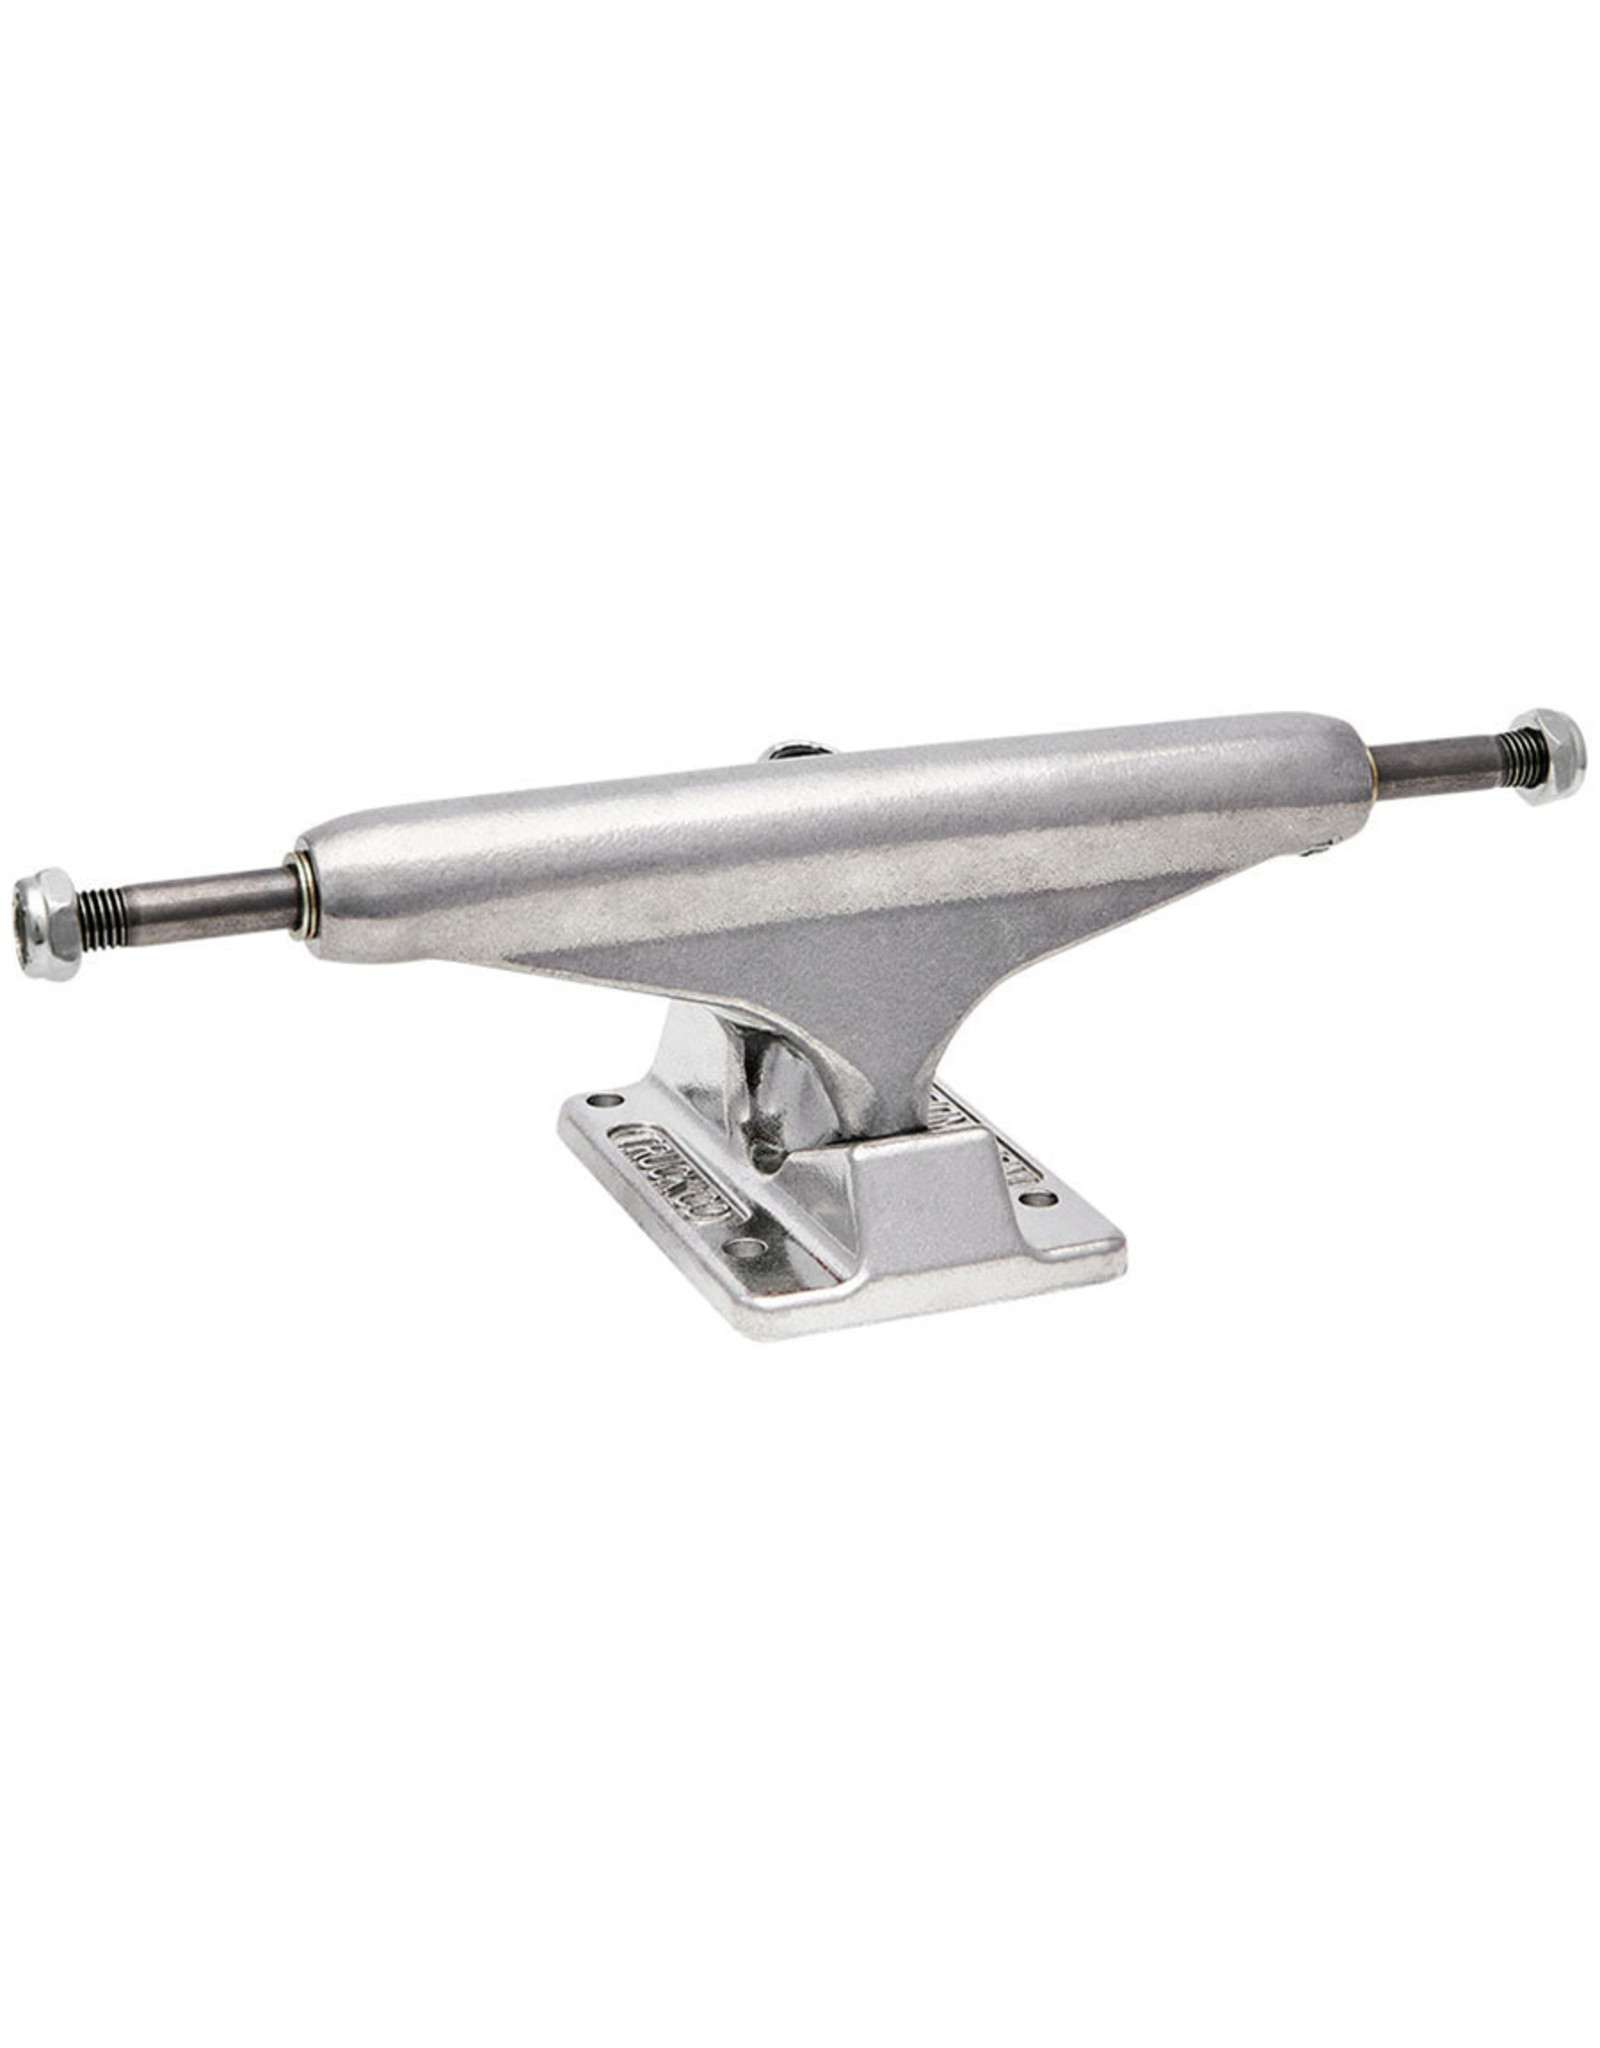 Independent Independent Trucks 149 Stage 11 Standard Silver (Sold in Pair)